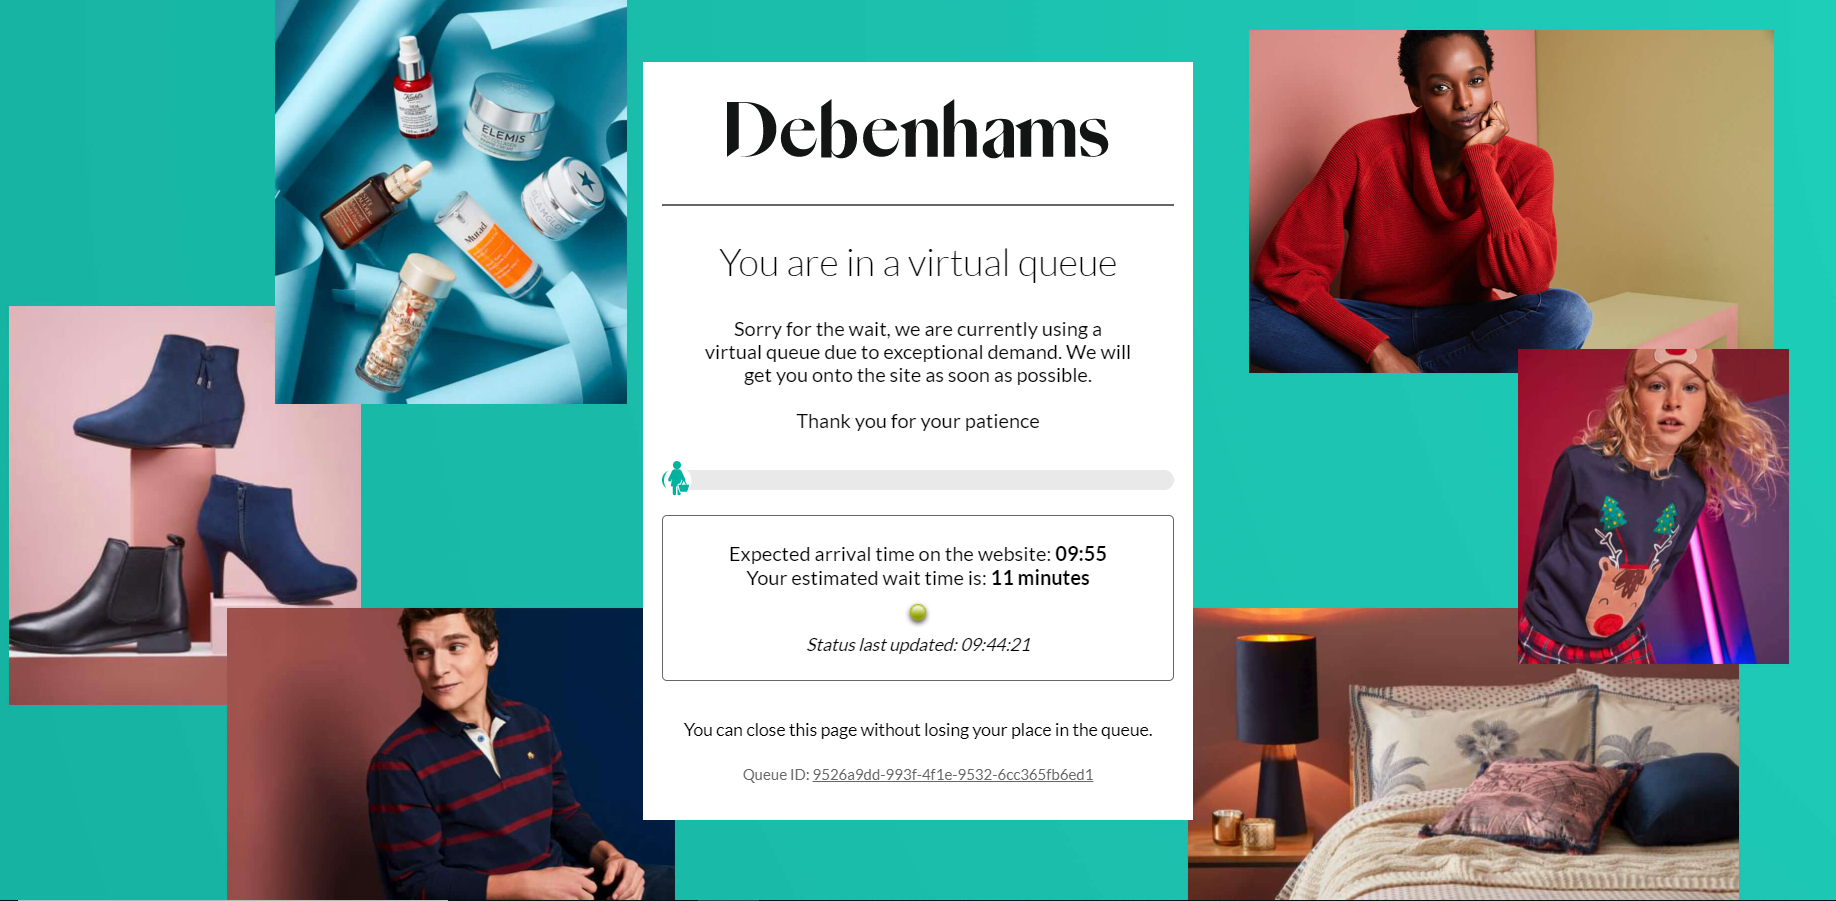 The Debenhams chain is offering discounts after announcing it will be closing